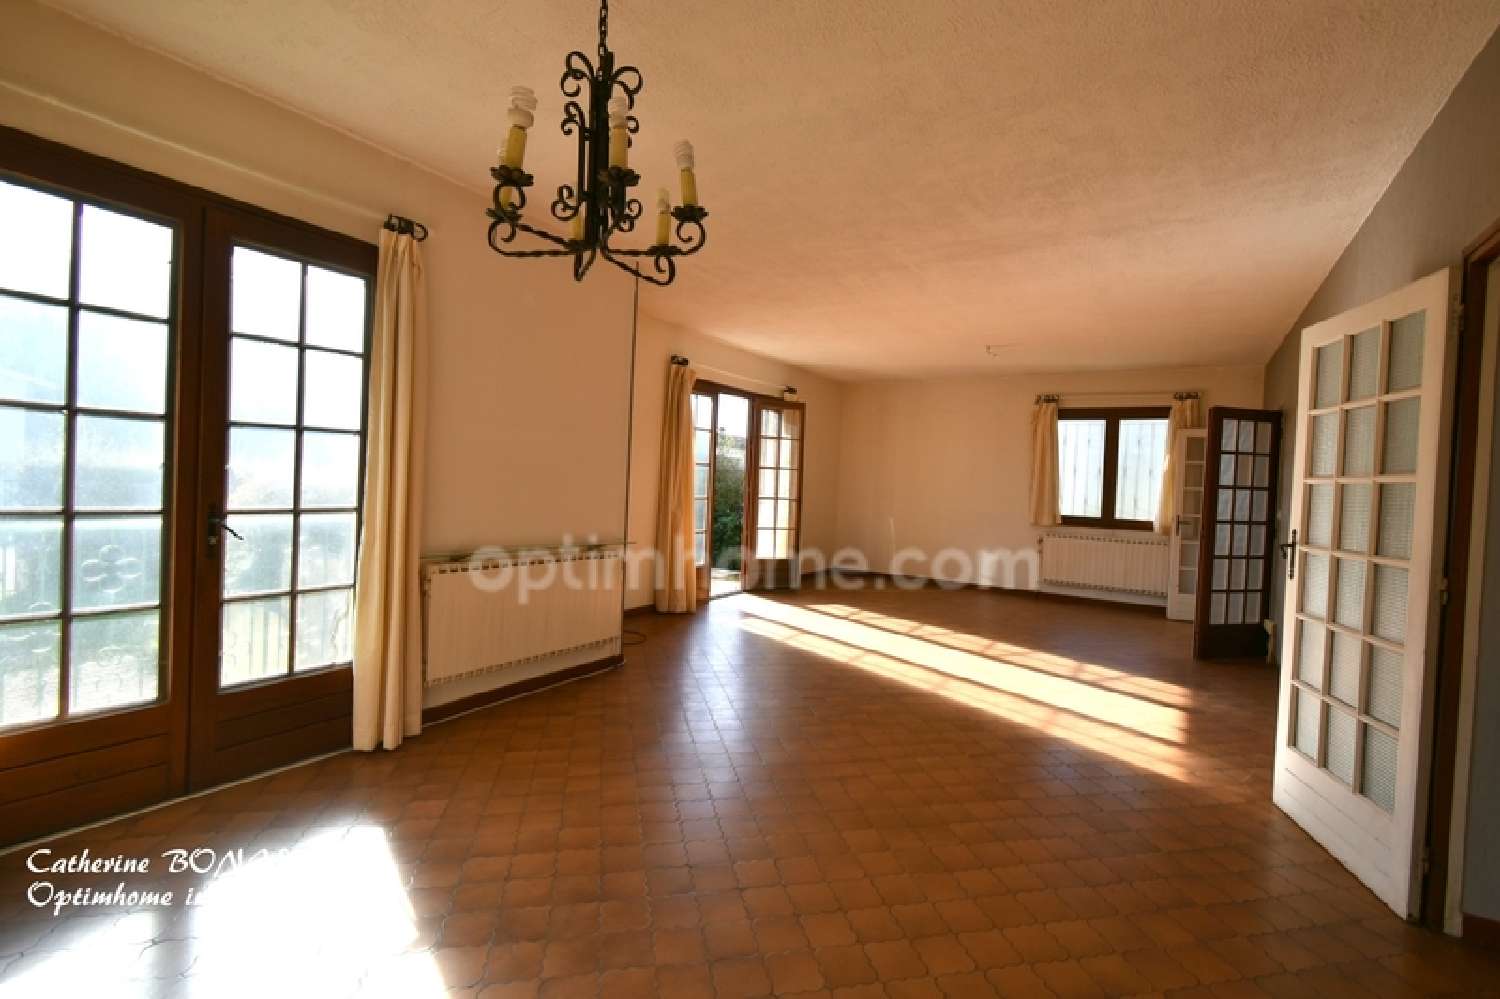  for sale house Talence Gironde 5